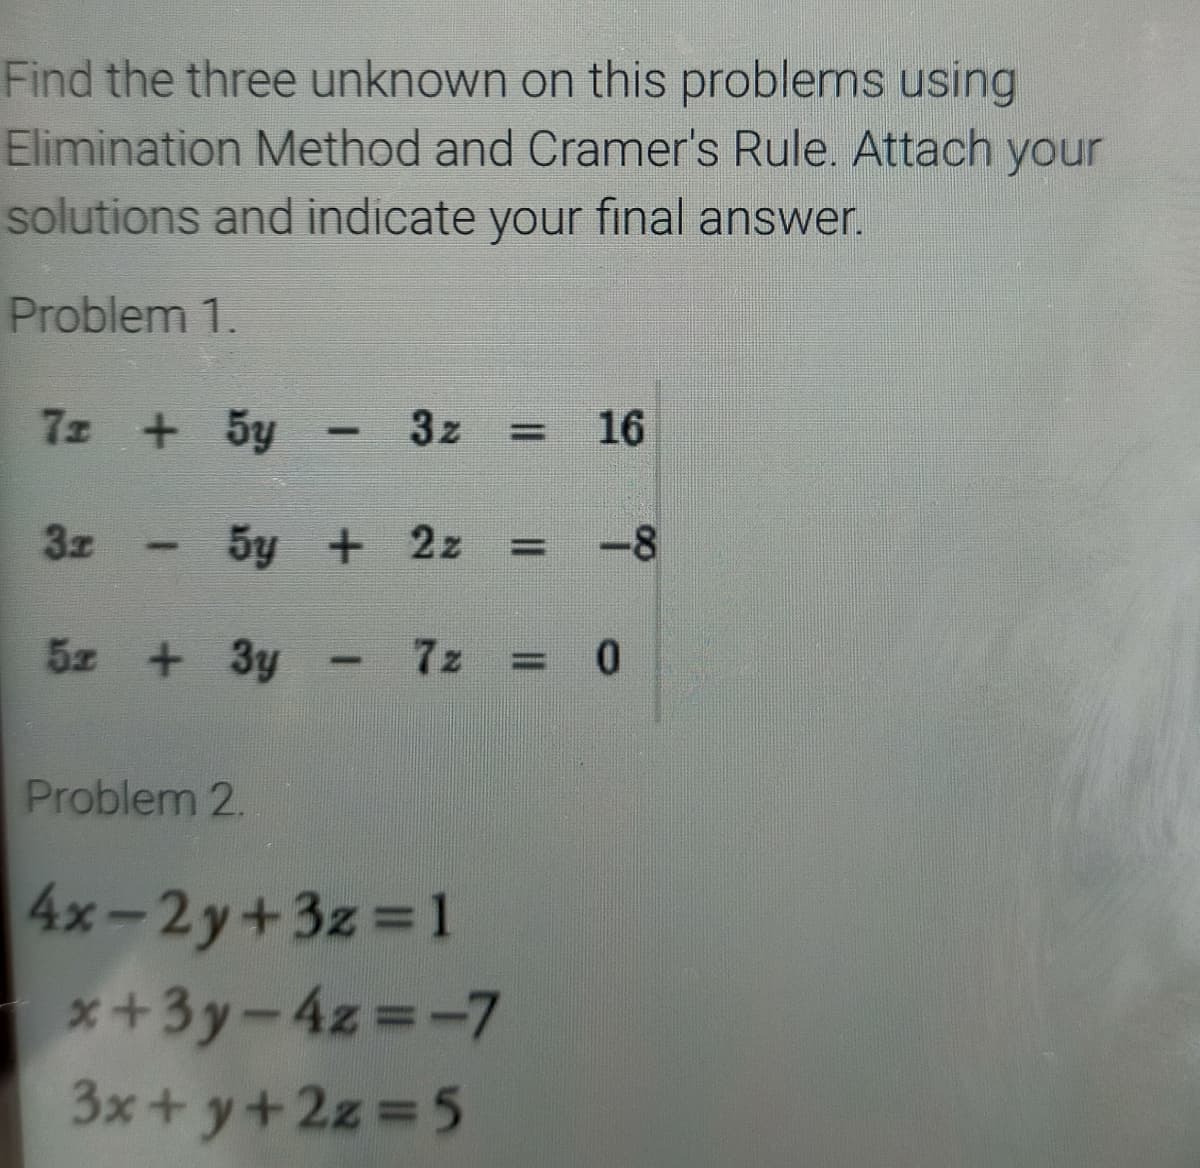 Find the three unknown on this problems using
Elimination Method and Cramer's Rule. Attach your
solutions and indicate your final answer.
Problem 1.
7z 5y
3z
16
%3D
3z
5y + 2z
-8
%3D
5z + 3y
7z
= 0
Problem 2.
4x-2y+3z 1
*+3y-4z -7
3x+ y+2z 5
